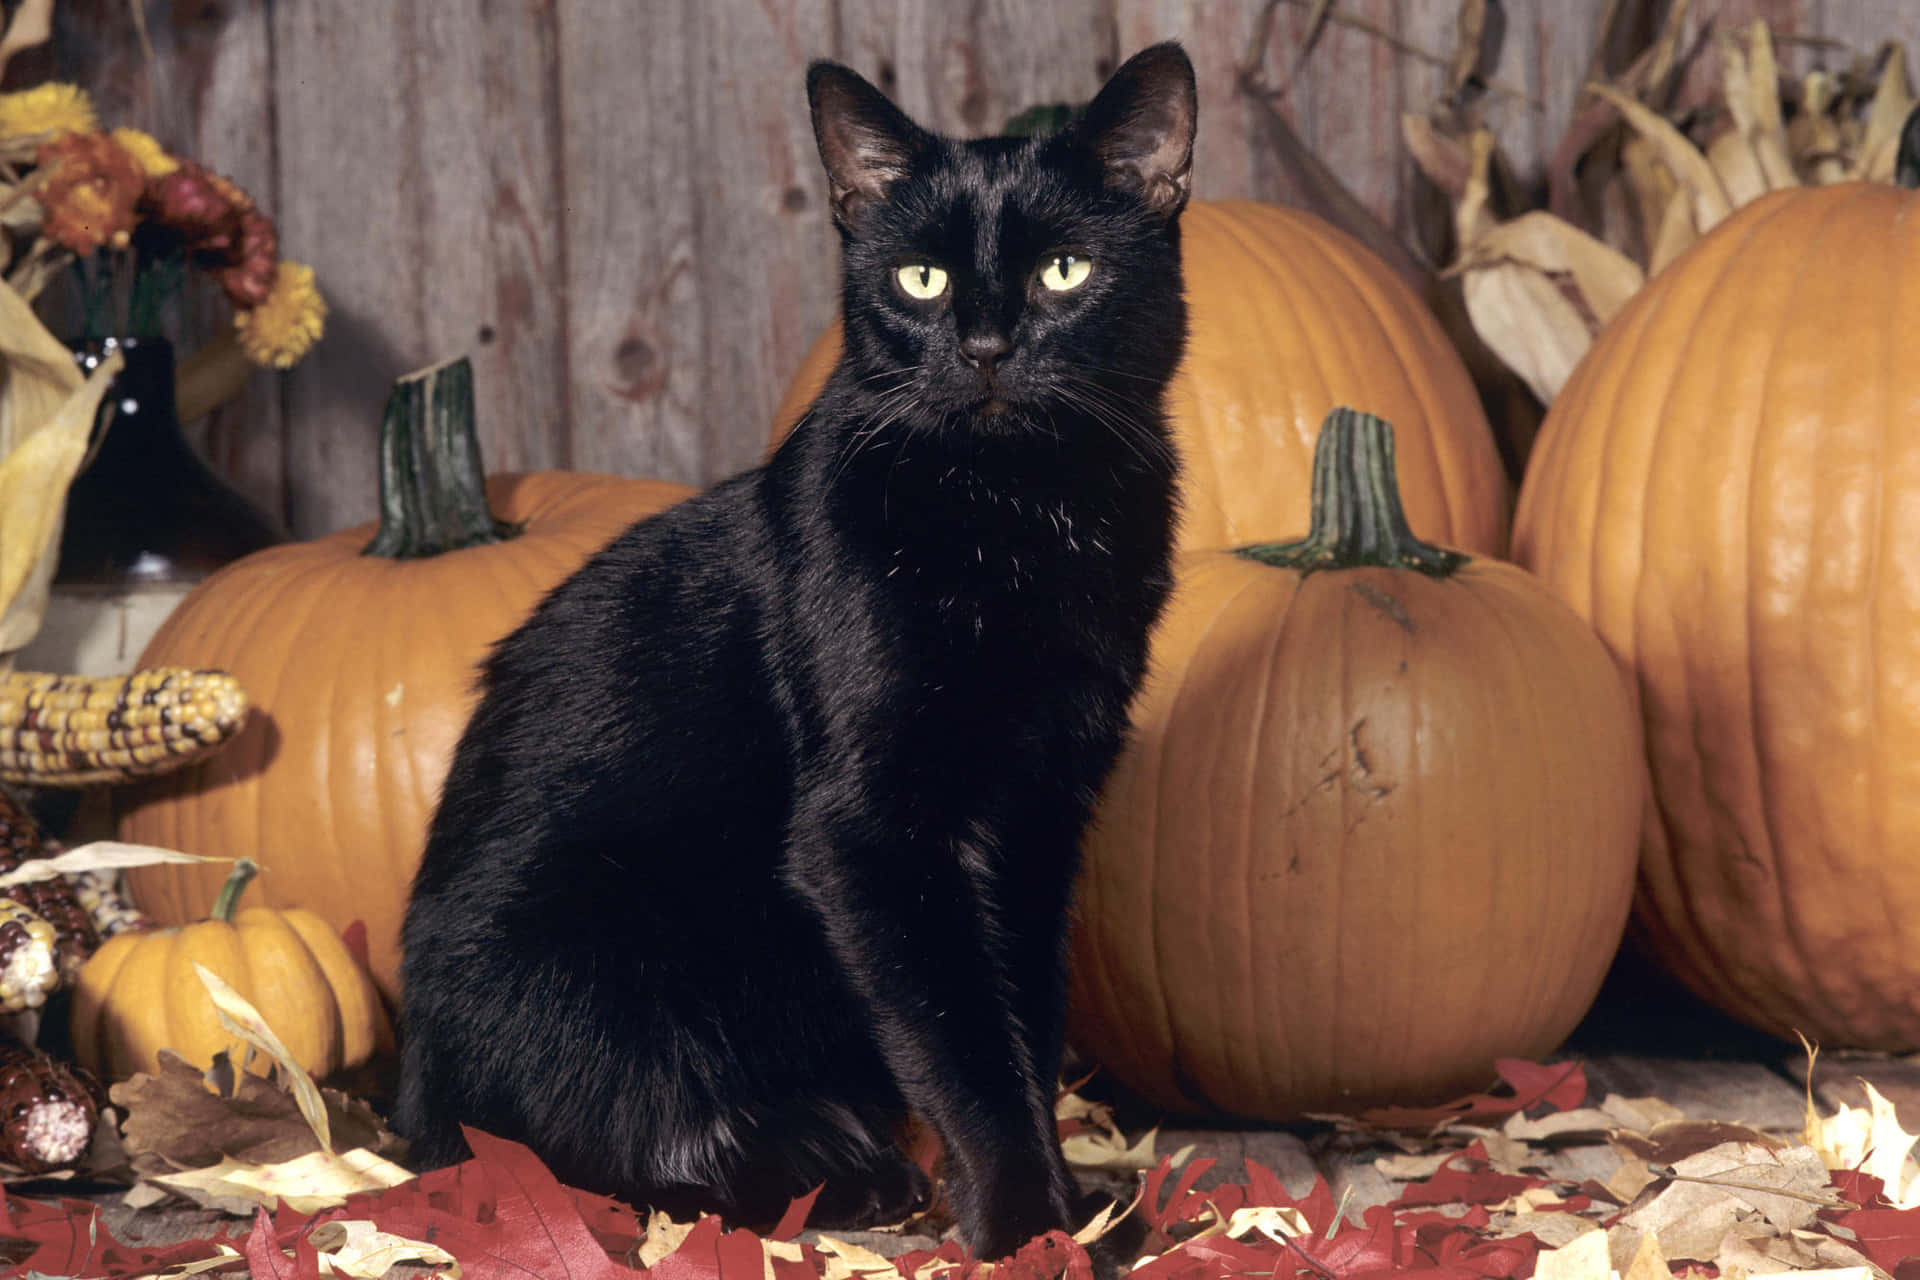 Make way for the spookiest kitty of them all this Halloween!